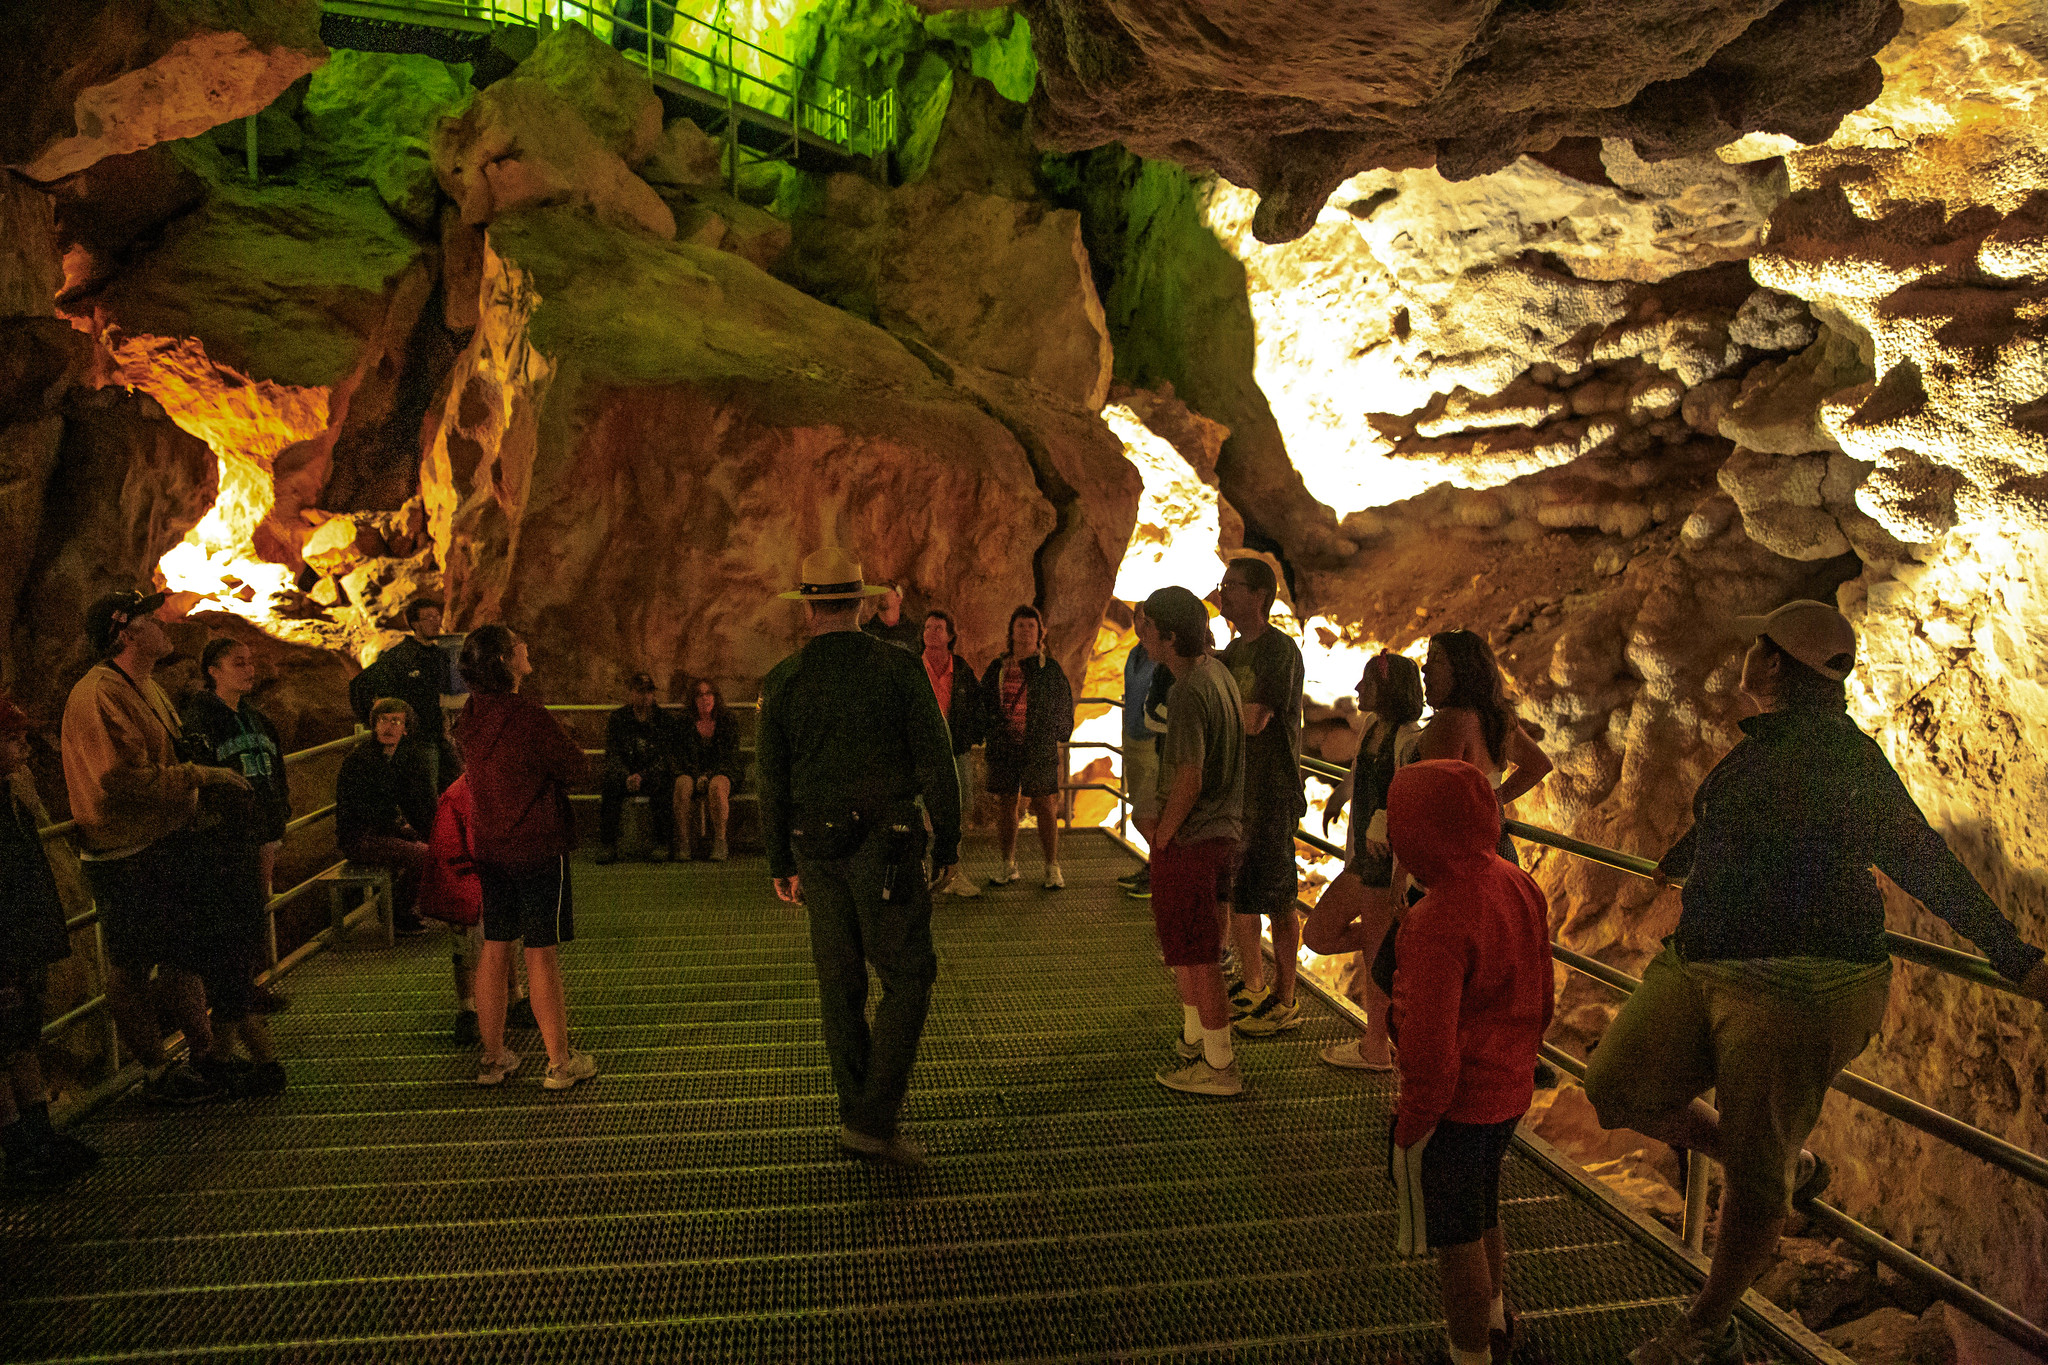 Tourists learning about the Jewel Cave National Monument, one of the best South Dakota tourist attractions, through a guide